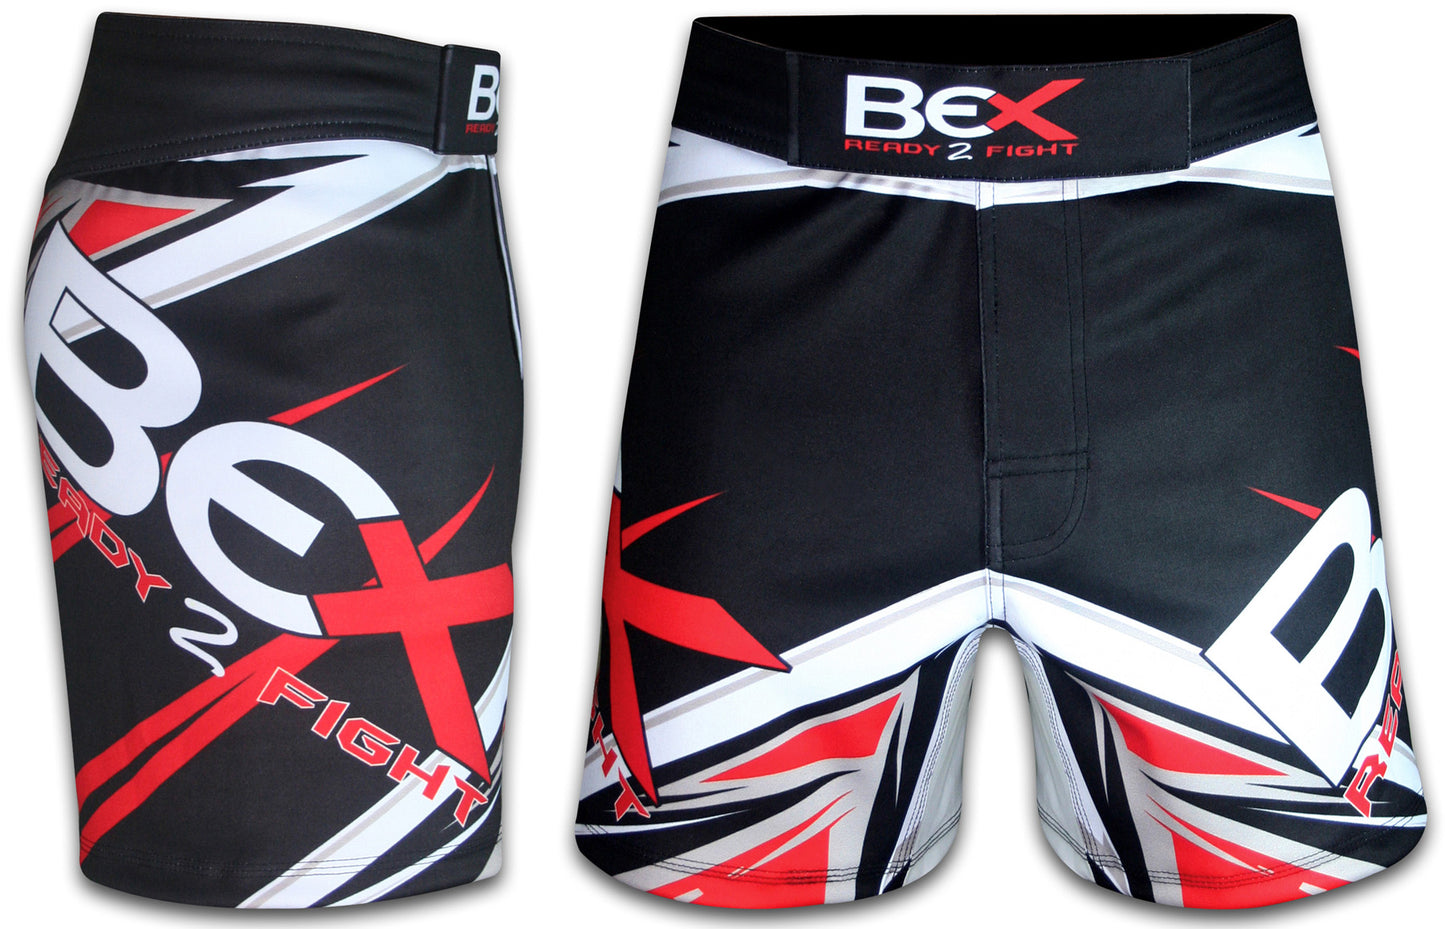 Premium Men's MMA - Grappling Shorts - Black,Red,White - High-Quality Gym / CrossFit / Workout Gear